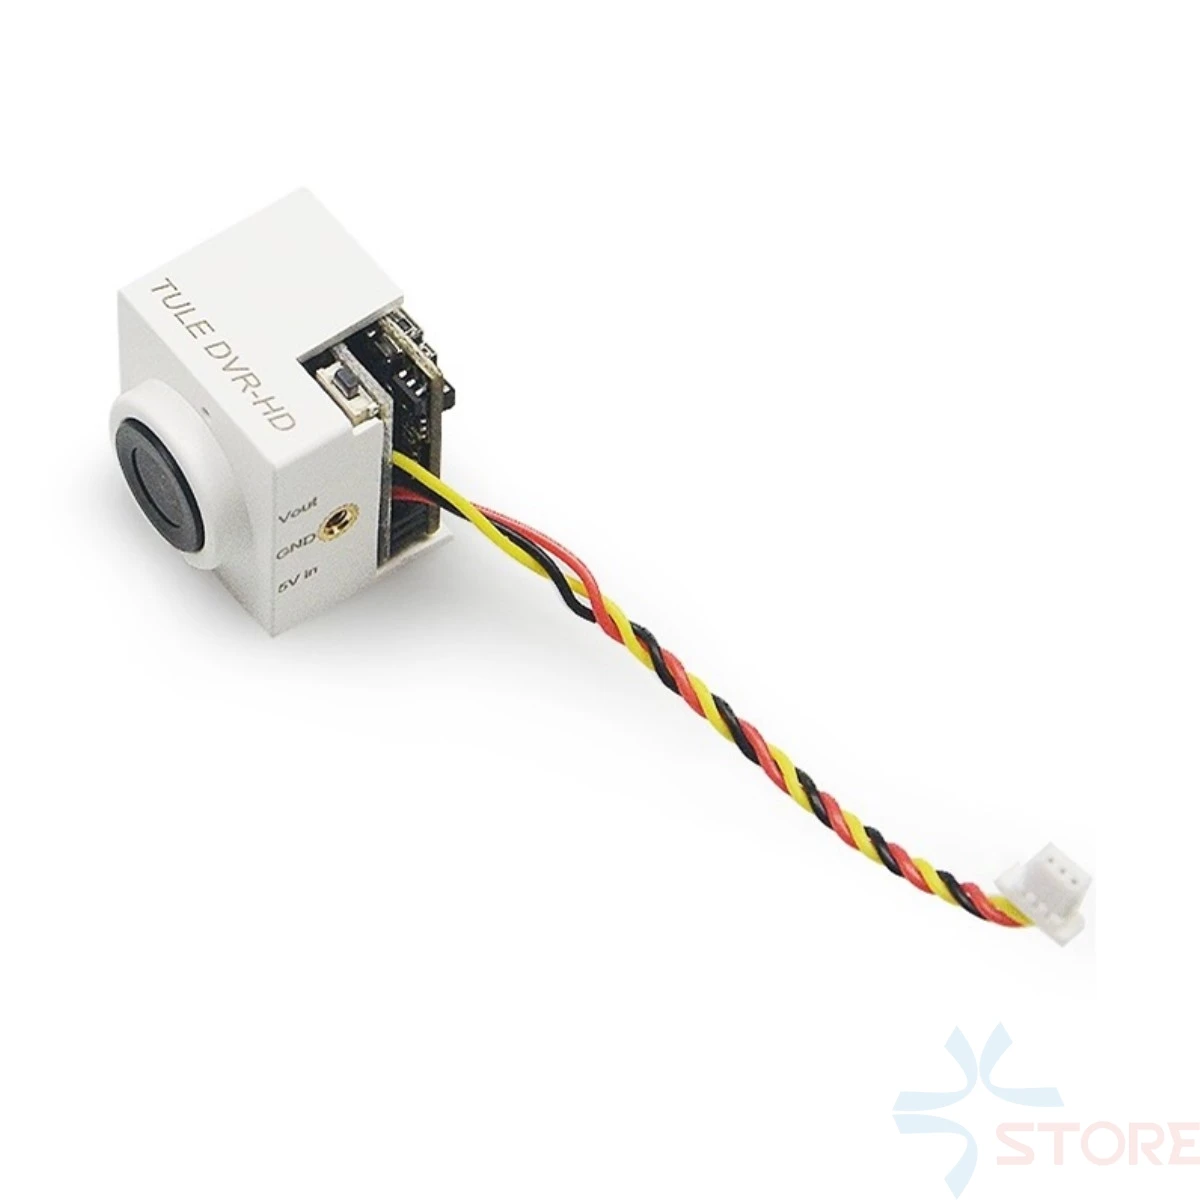 Only 7g TULE 720P 170 Wide Angle Micro Mini Camera with DVR function for Aerial Photography FPV Racing 5